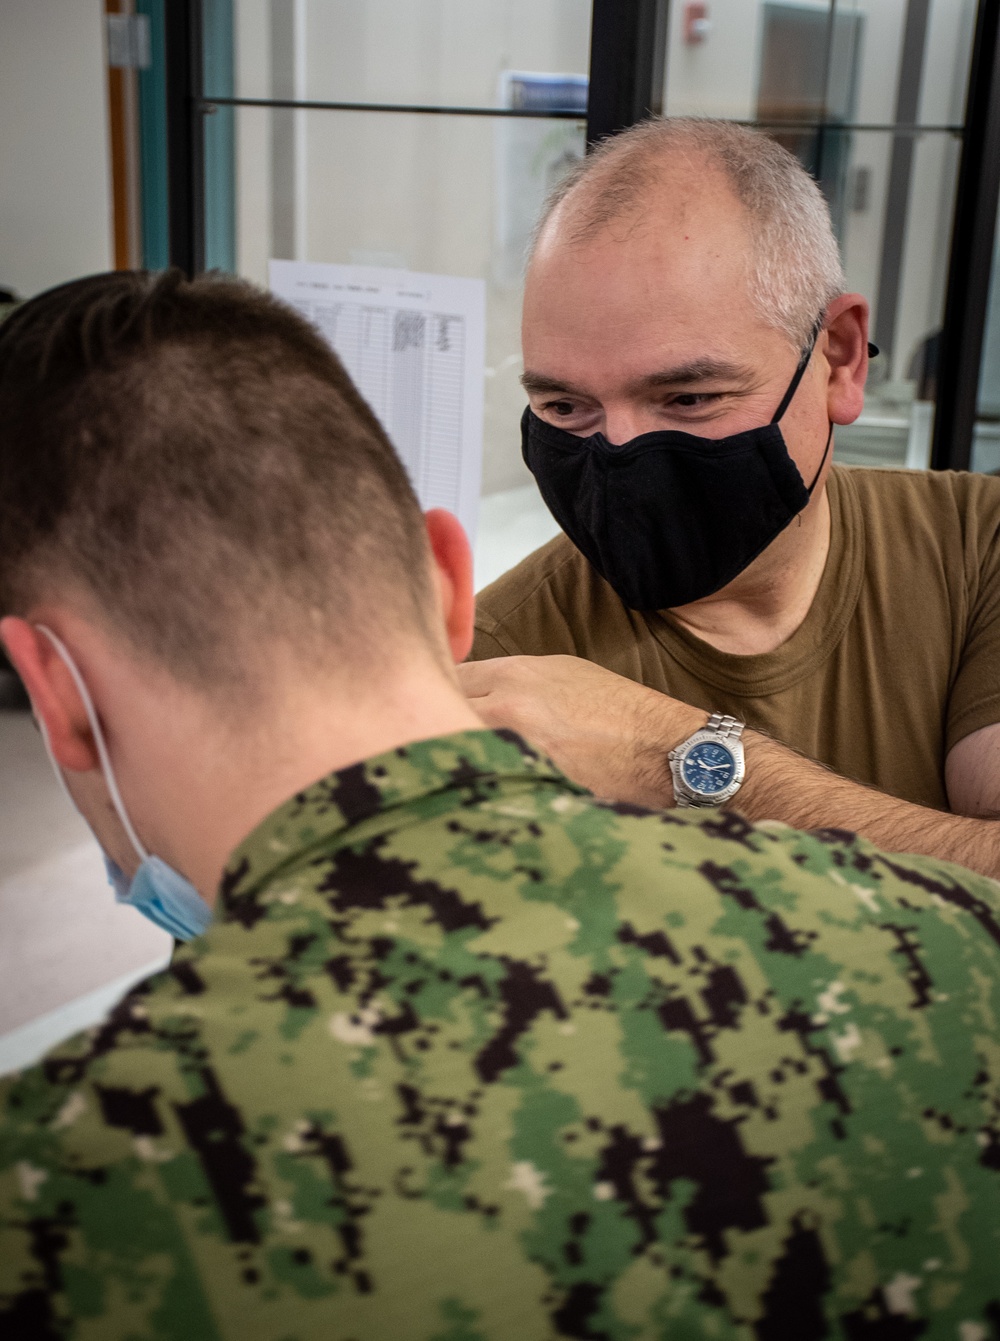 NUWC Keyport commanding officer receives COVID-19 vaccine